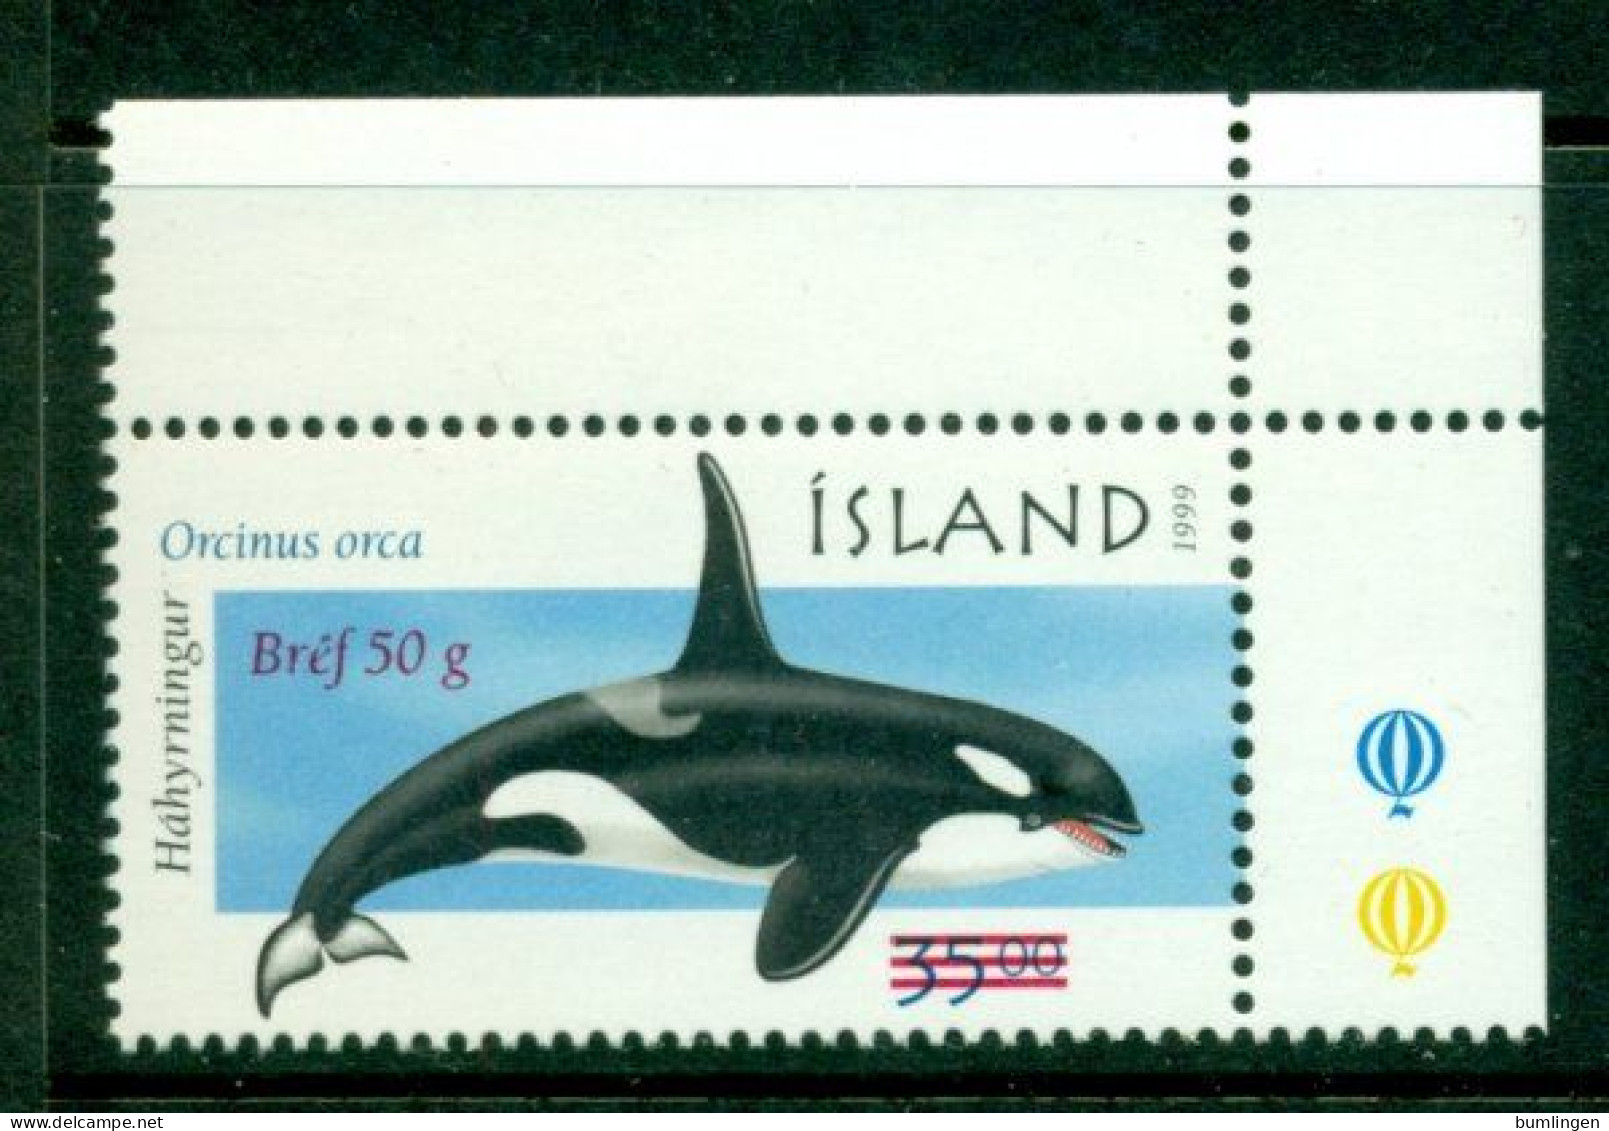 ICELAND 2001 Mi 988** Whale - Surcharge [B594] - Whales